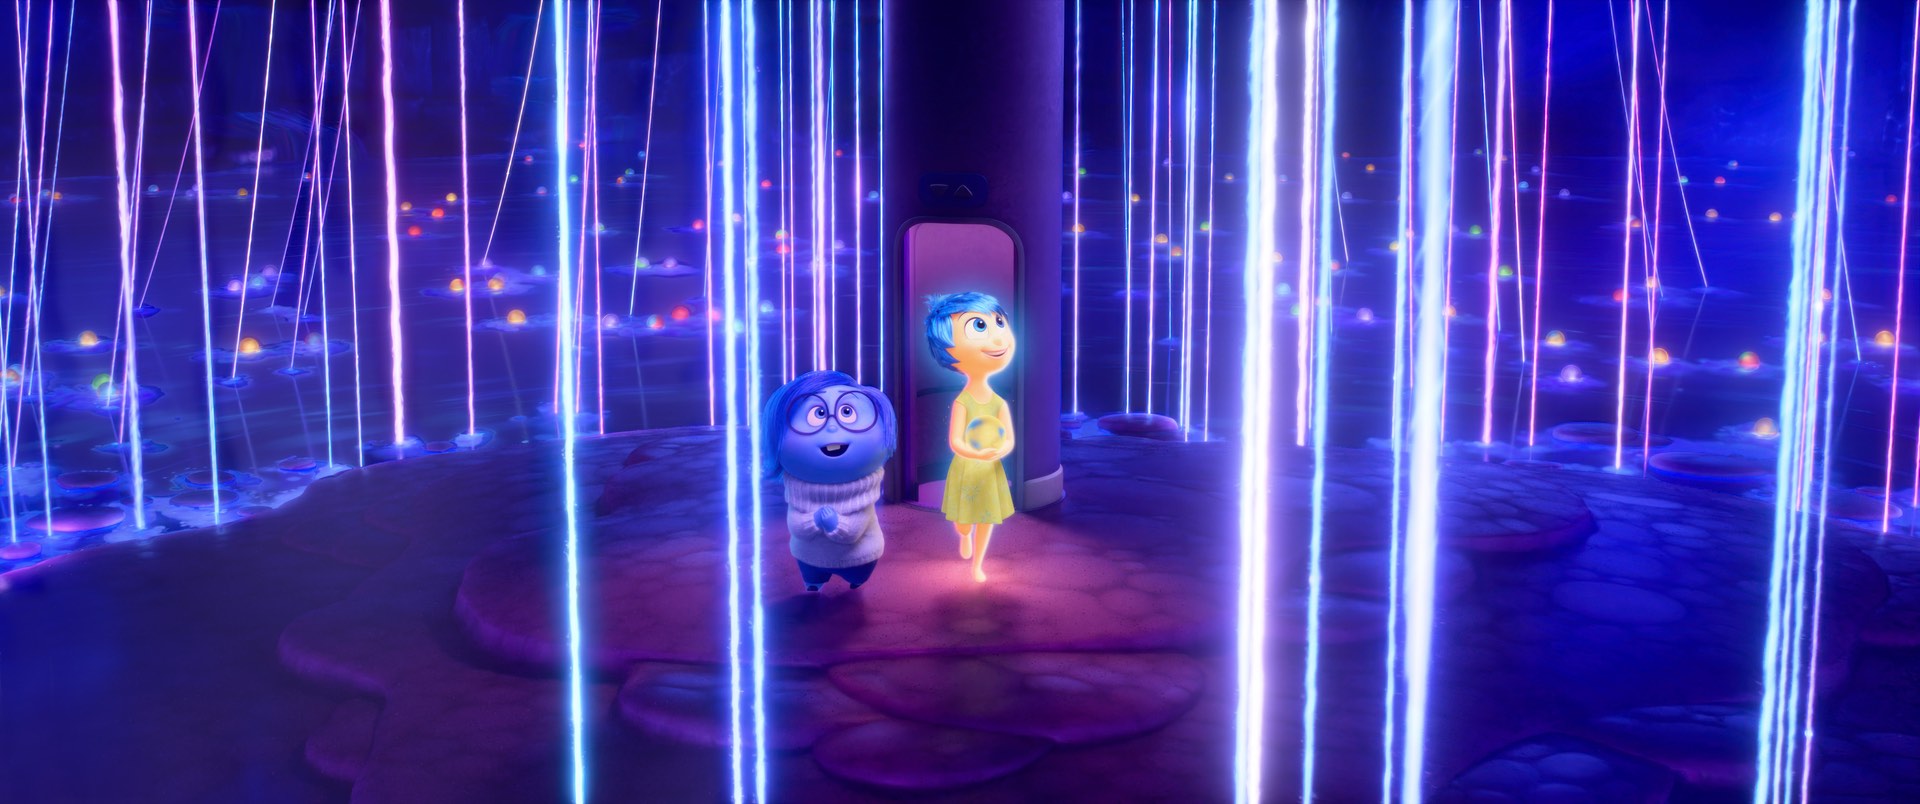 Inside out 2 movie